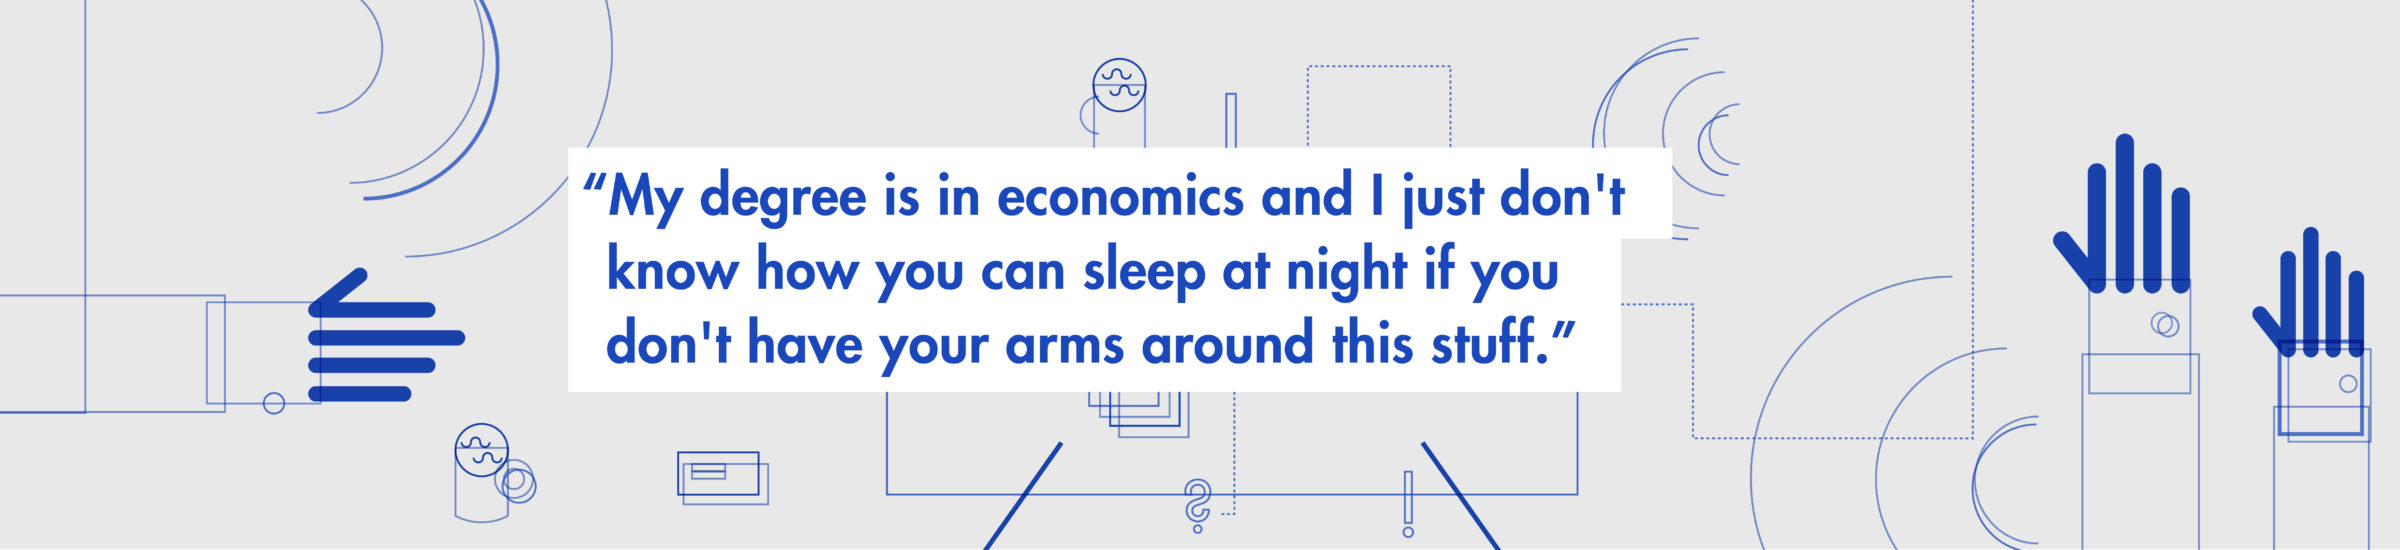 "My degree is in economics and I just don't know how you can sleep at night if you don't have your arms around this stuff." Click to meet Todd, a Spader client.